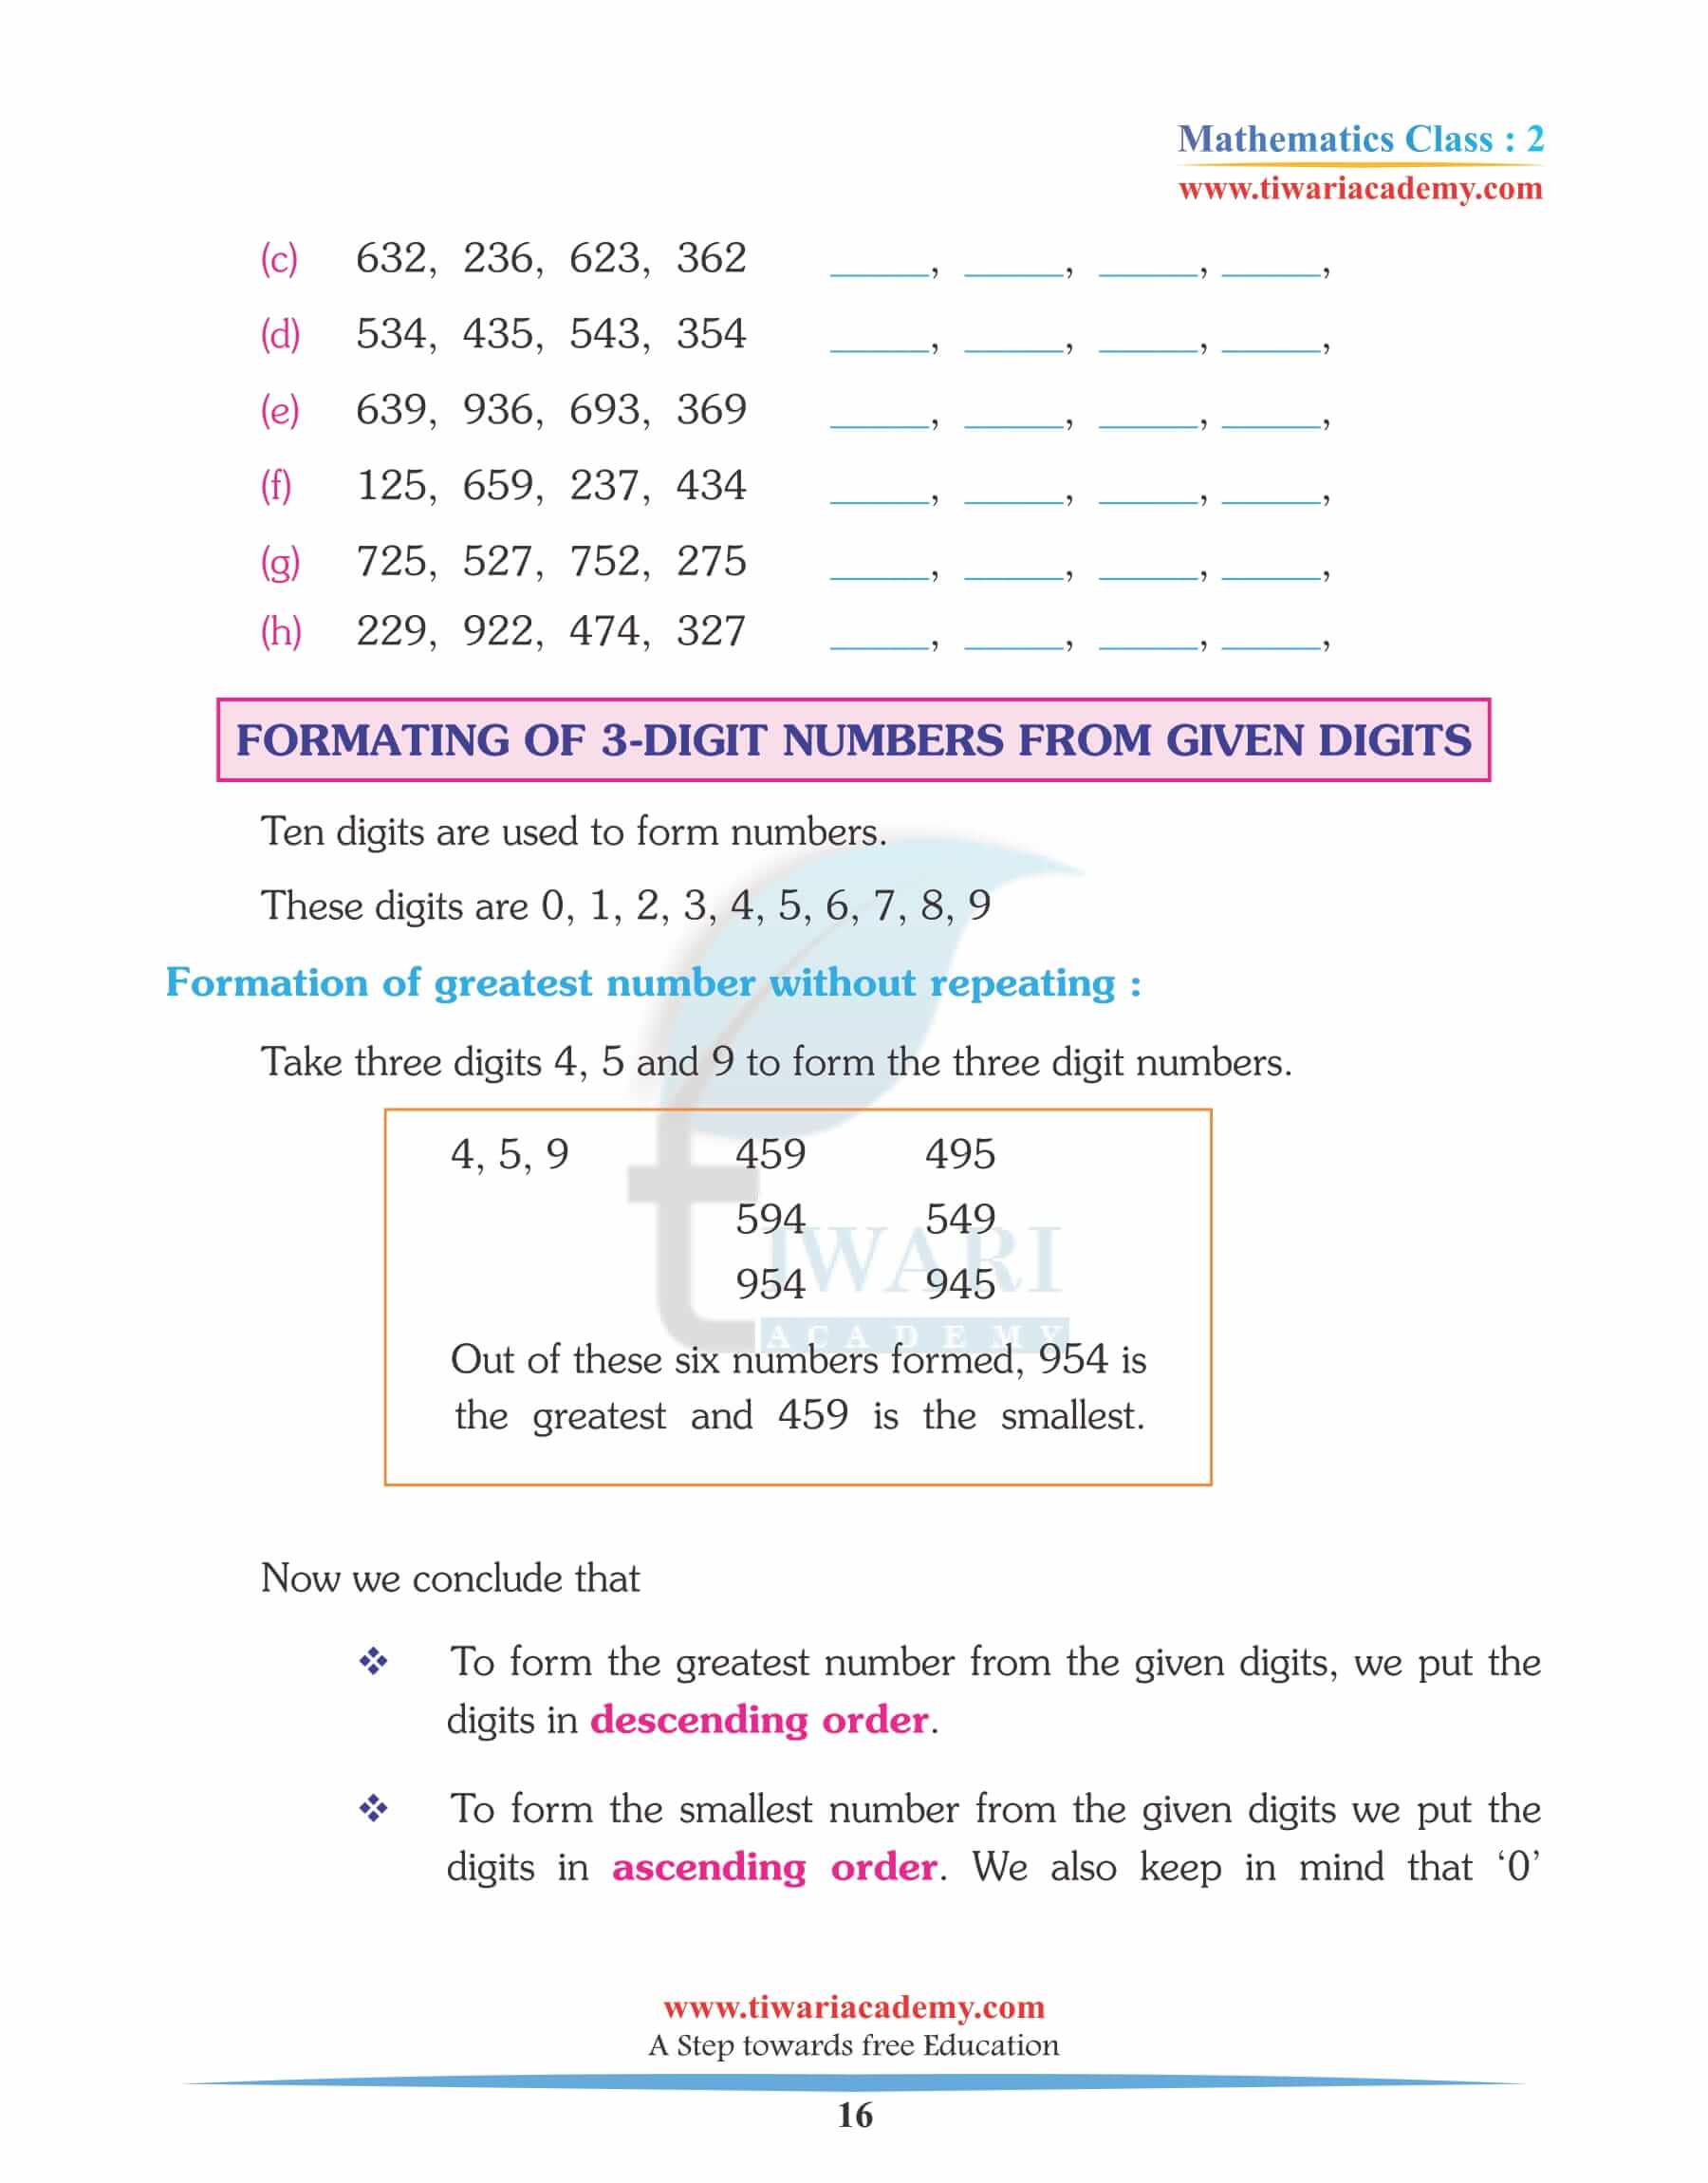 Grade 2 Maths Chapter 2 Revision books